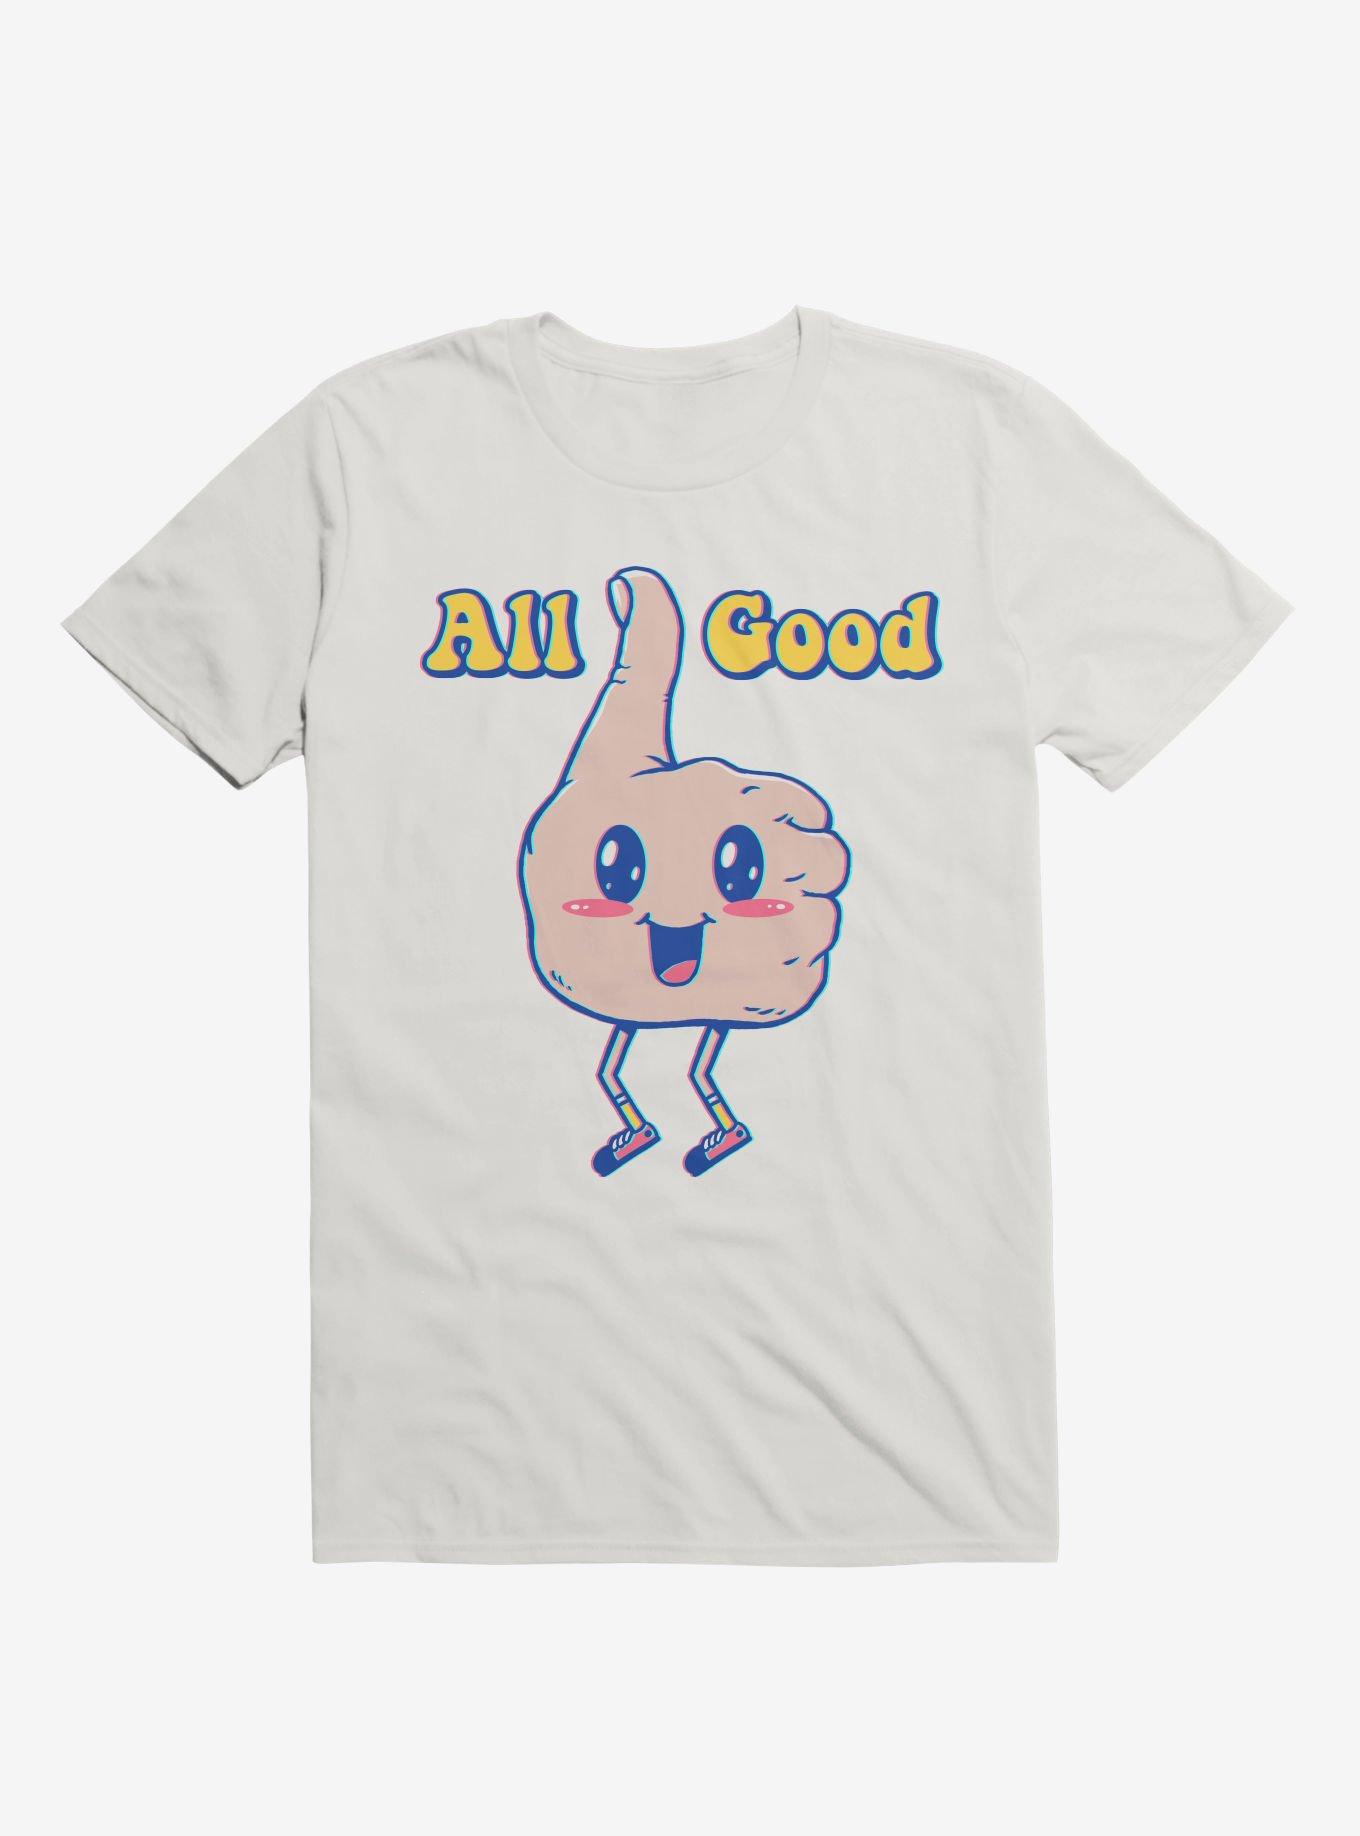 It's All Good Thumbs Up White T-Shirt, , hi-res